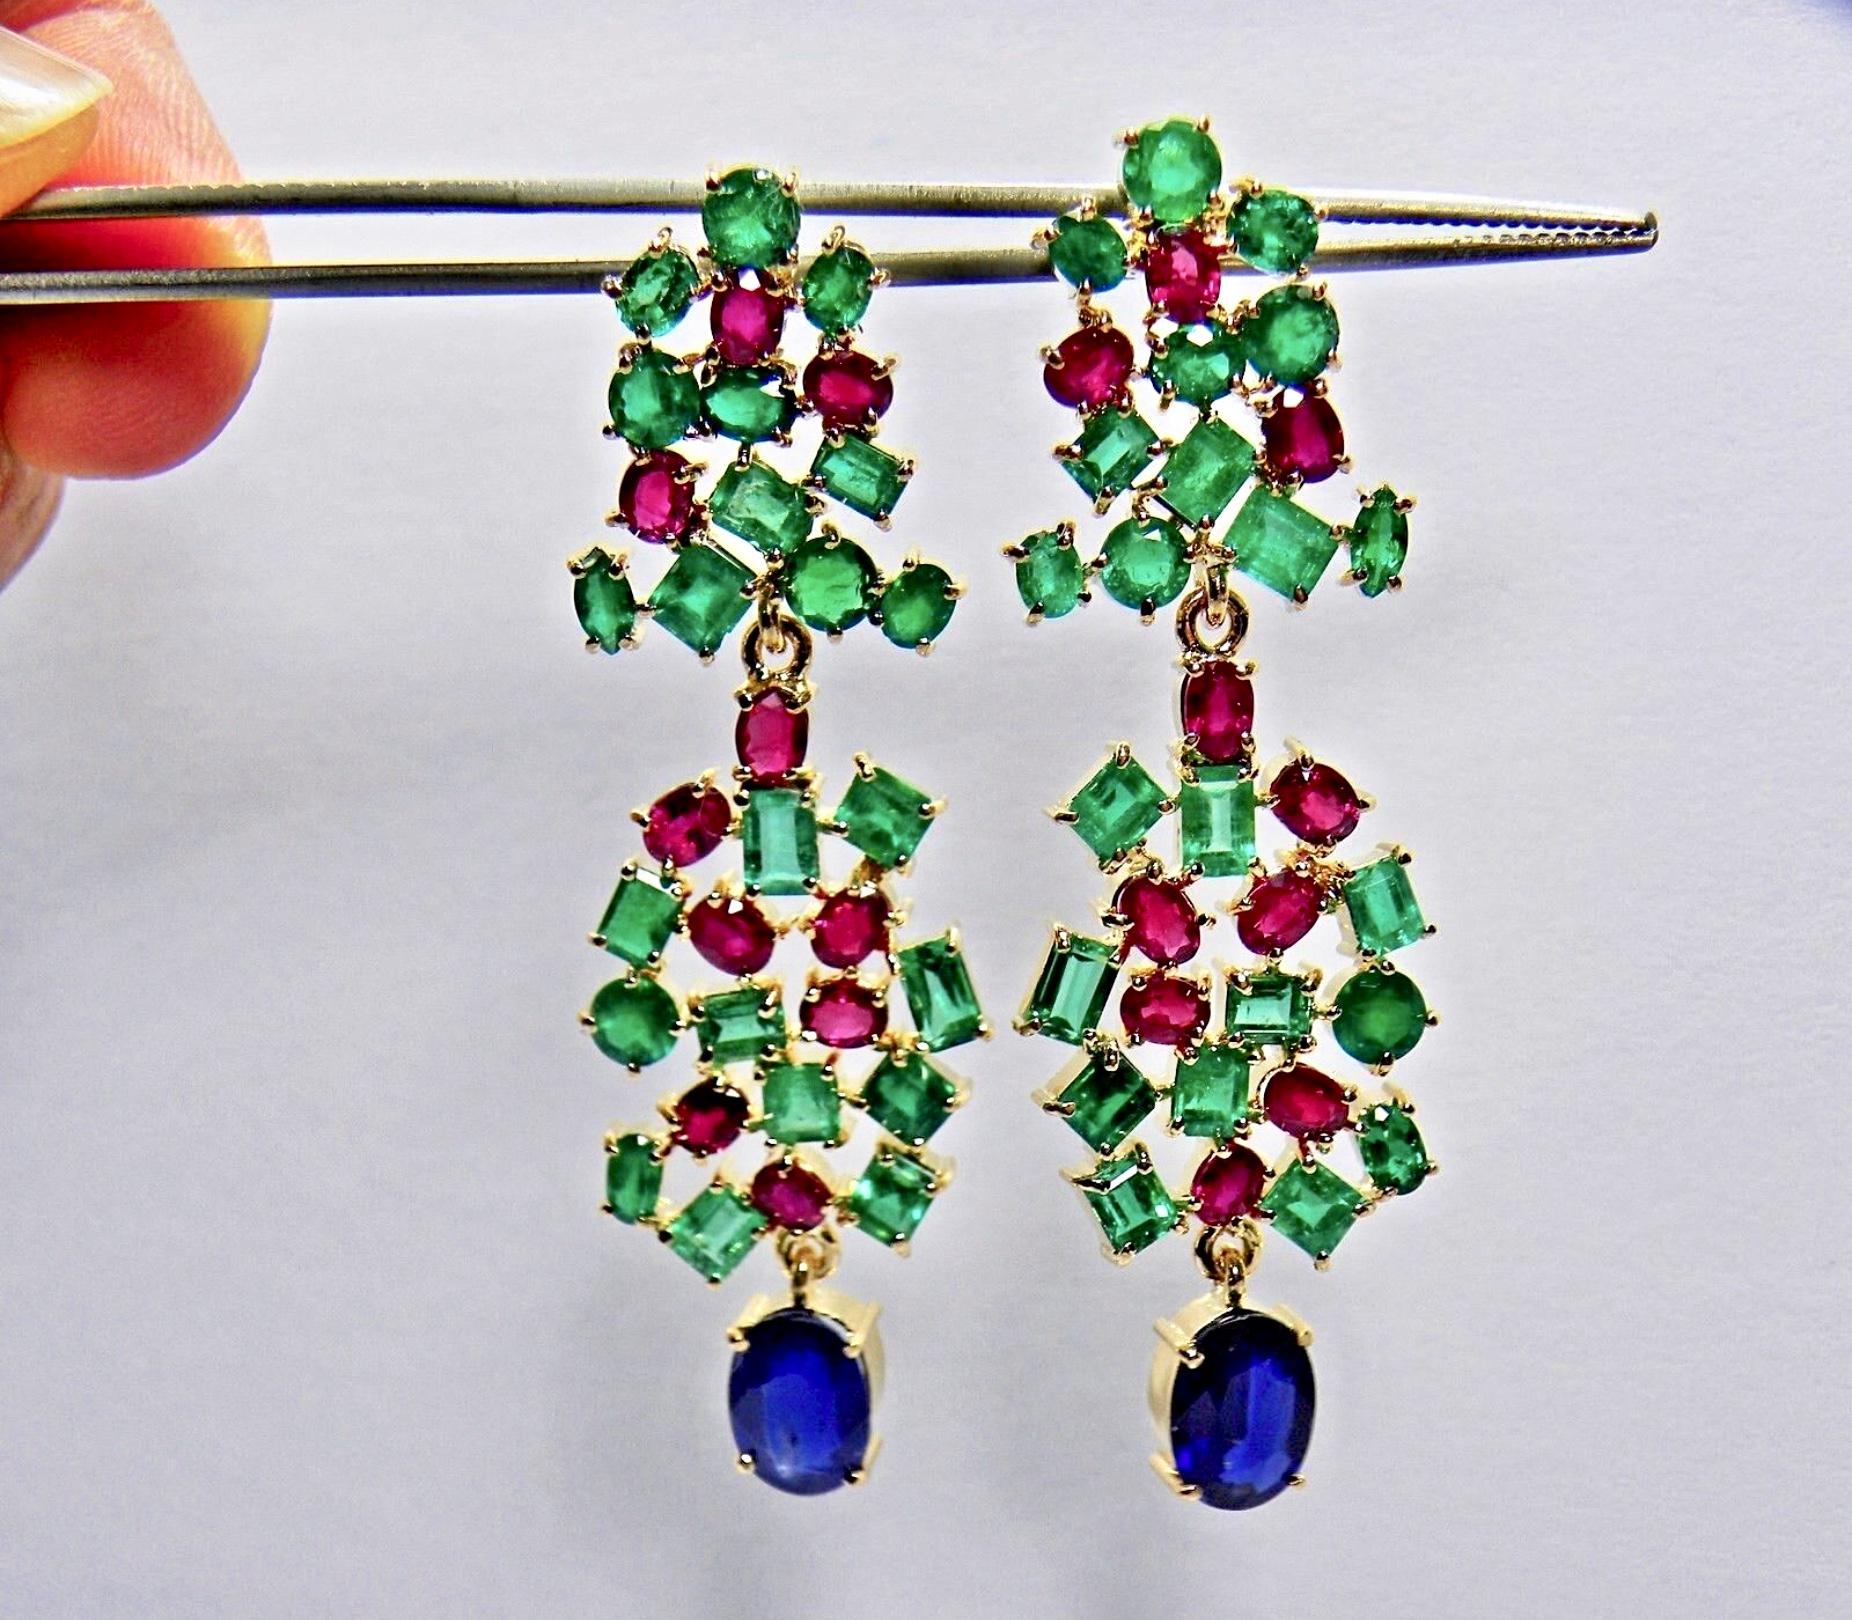  19.36 Carat Sapphire, Emerald, Ruby Chandeliers Earrings One of a Kind  For Sale 3